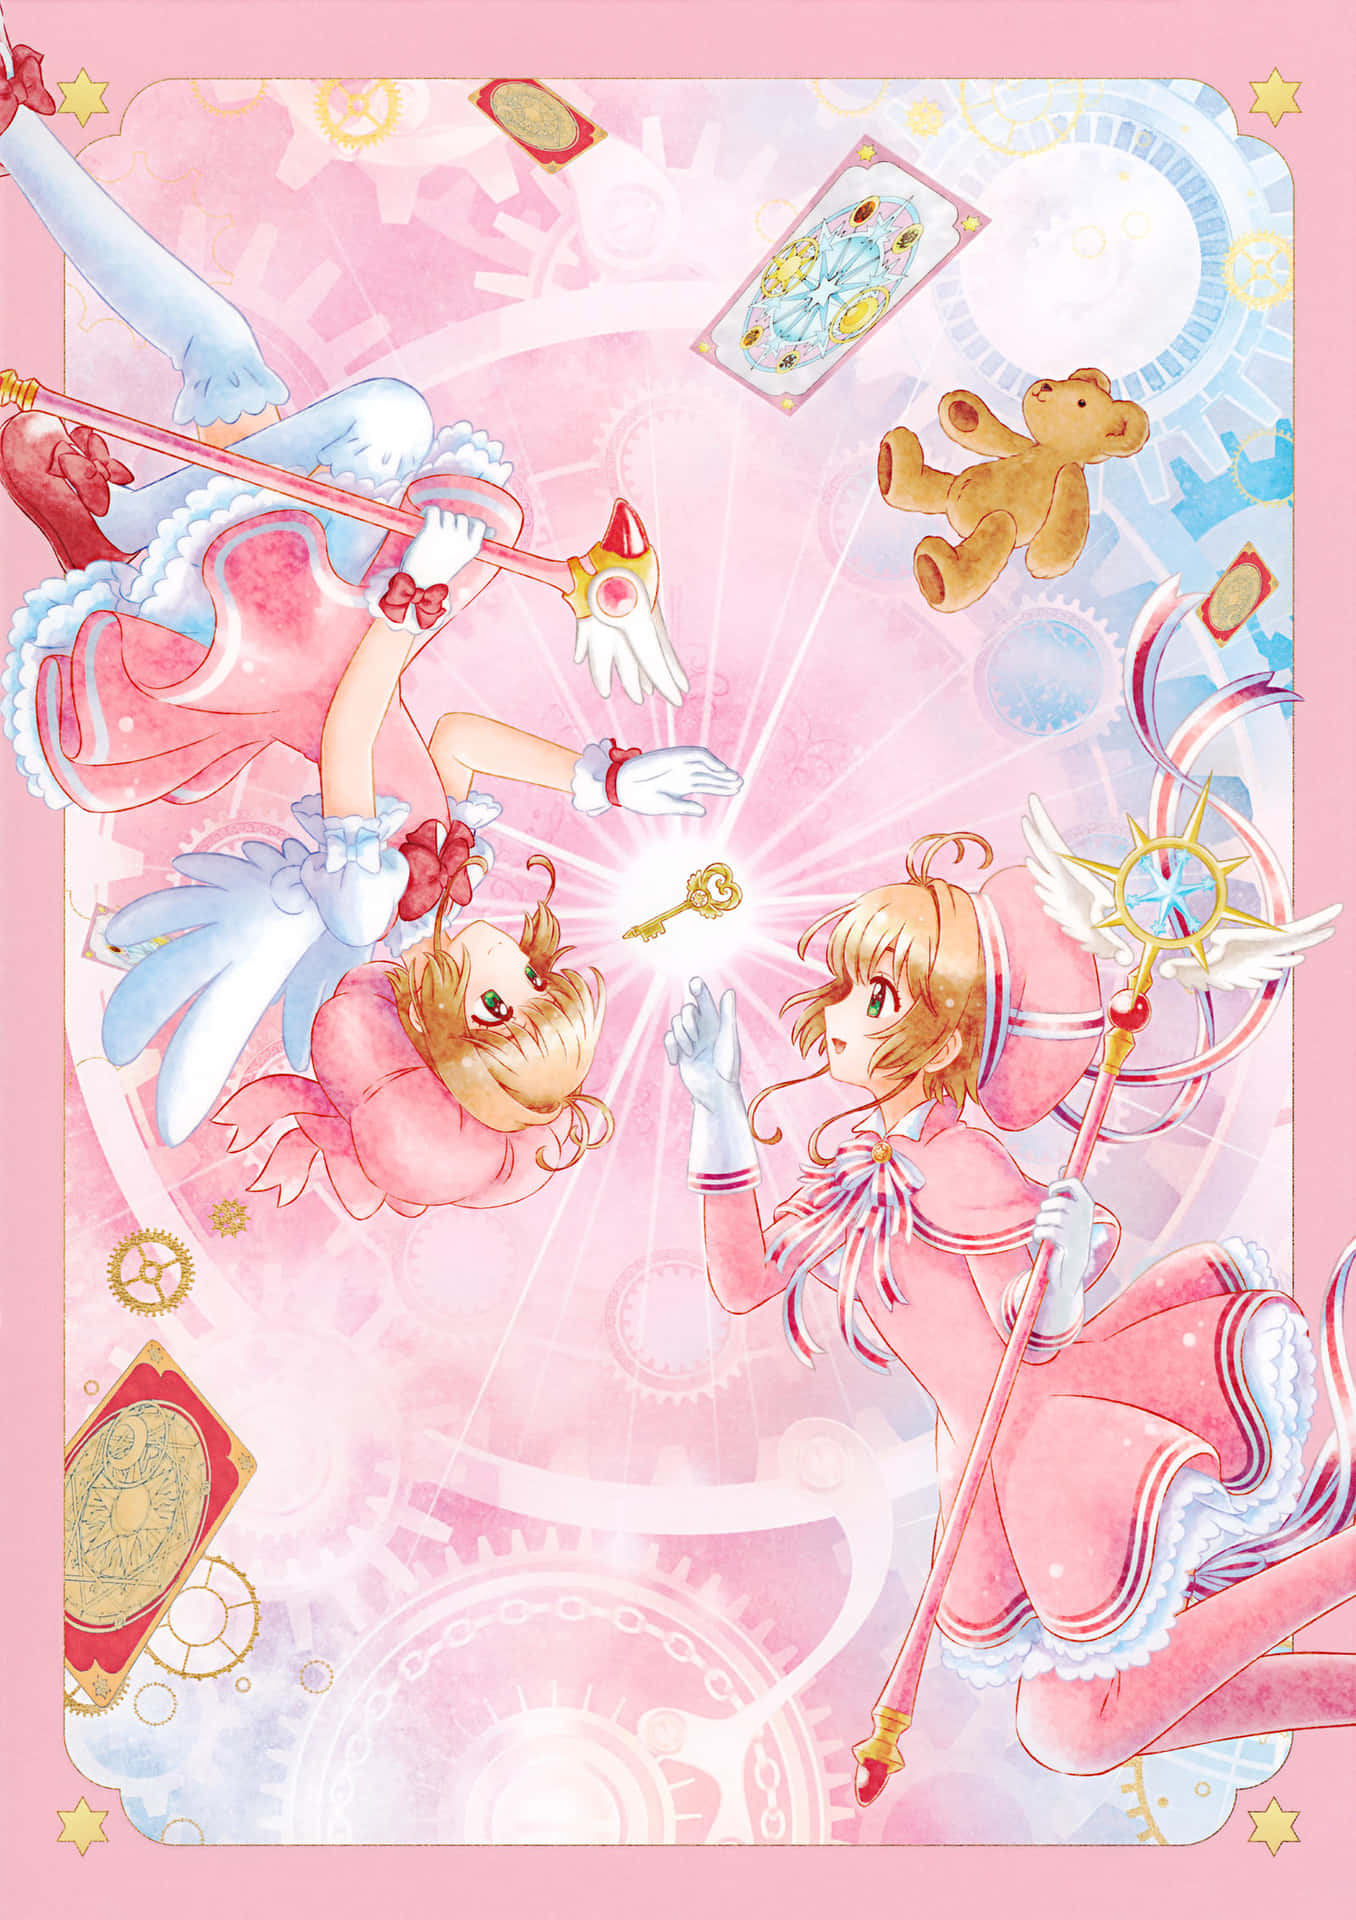 A Pink Blanket With Two Girls In Pink Dresses